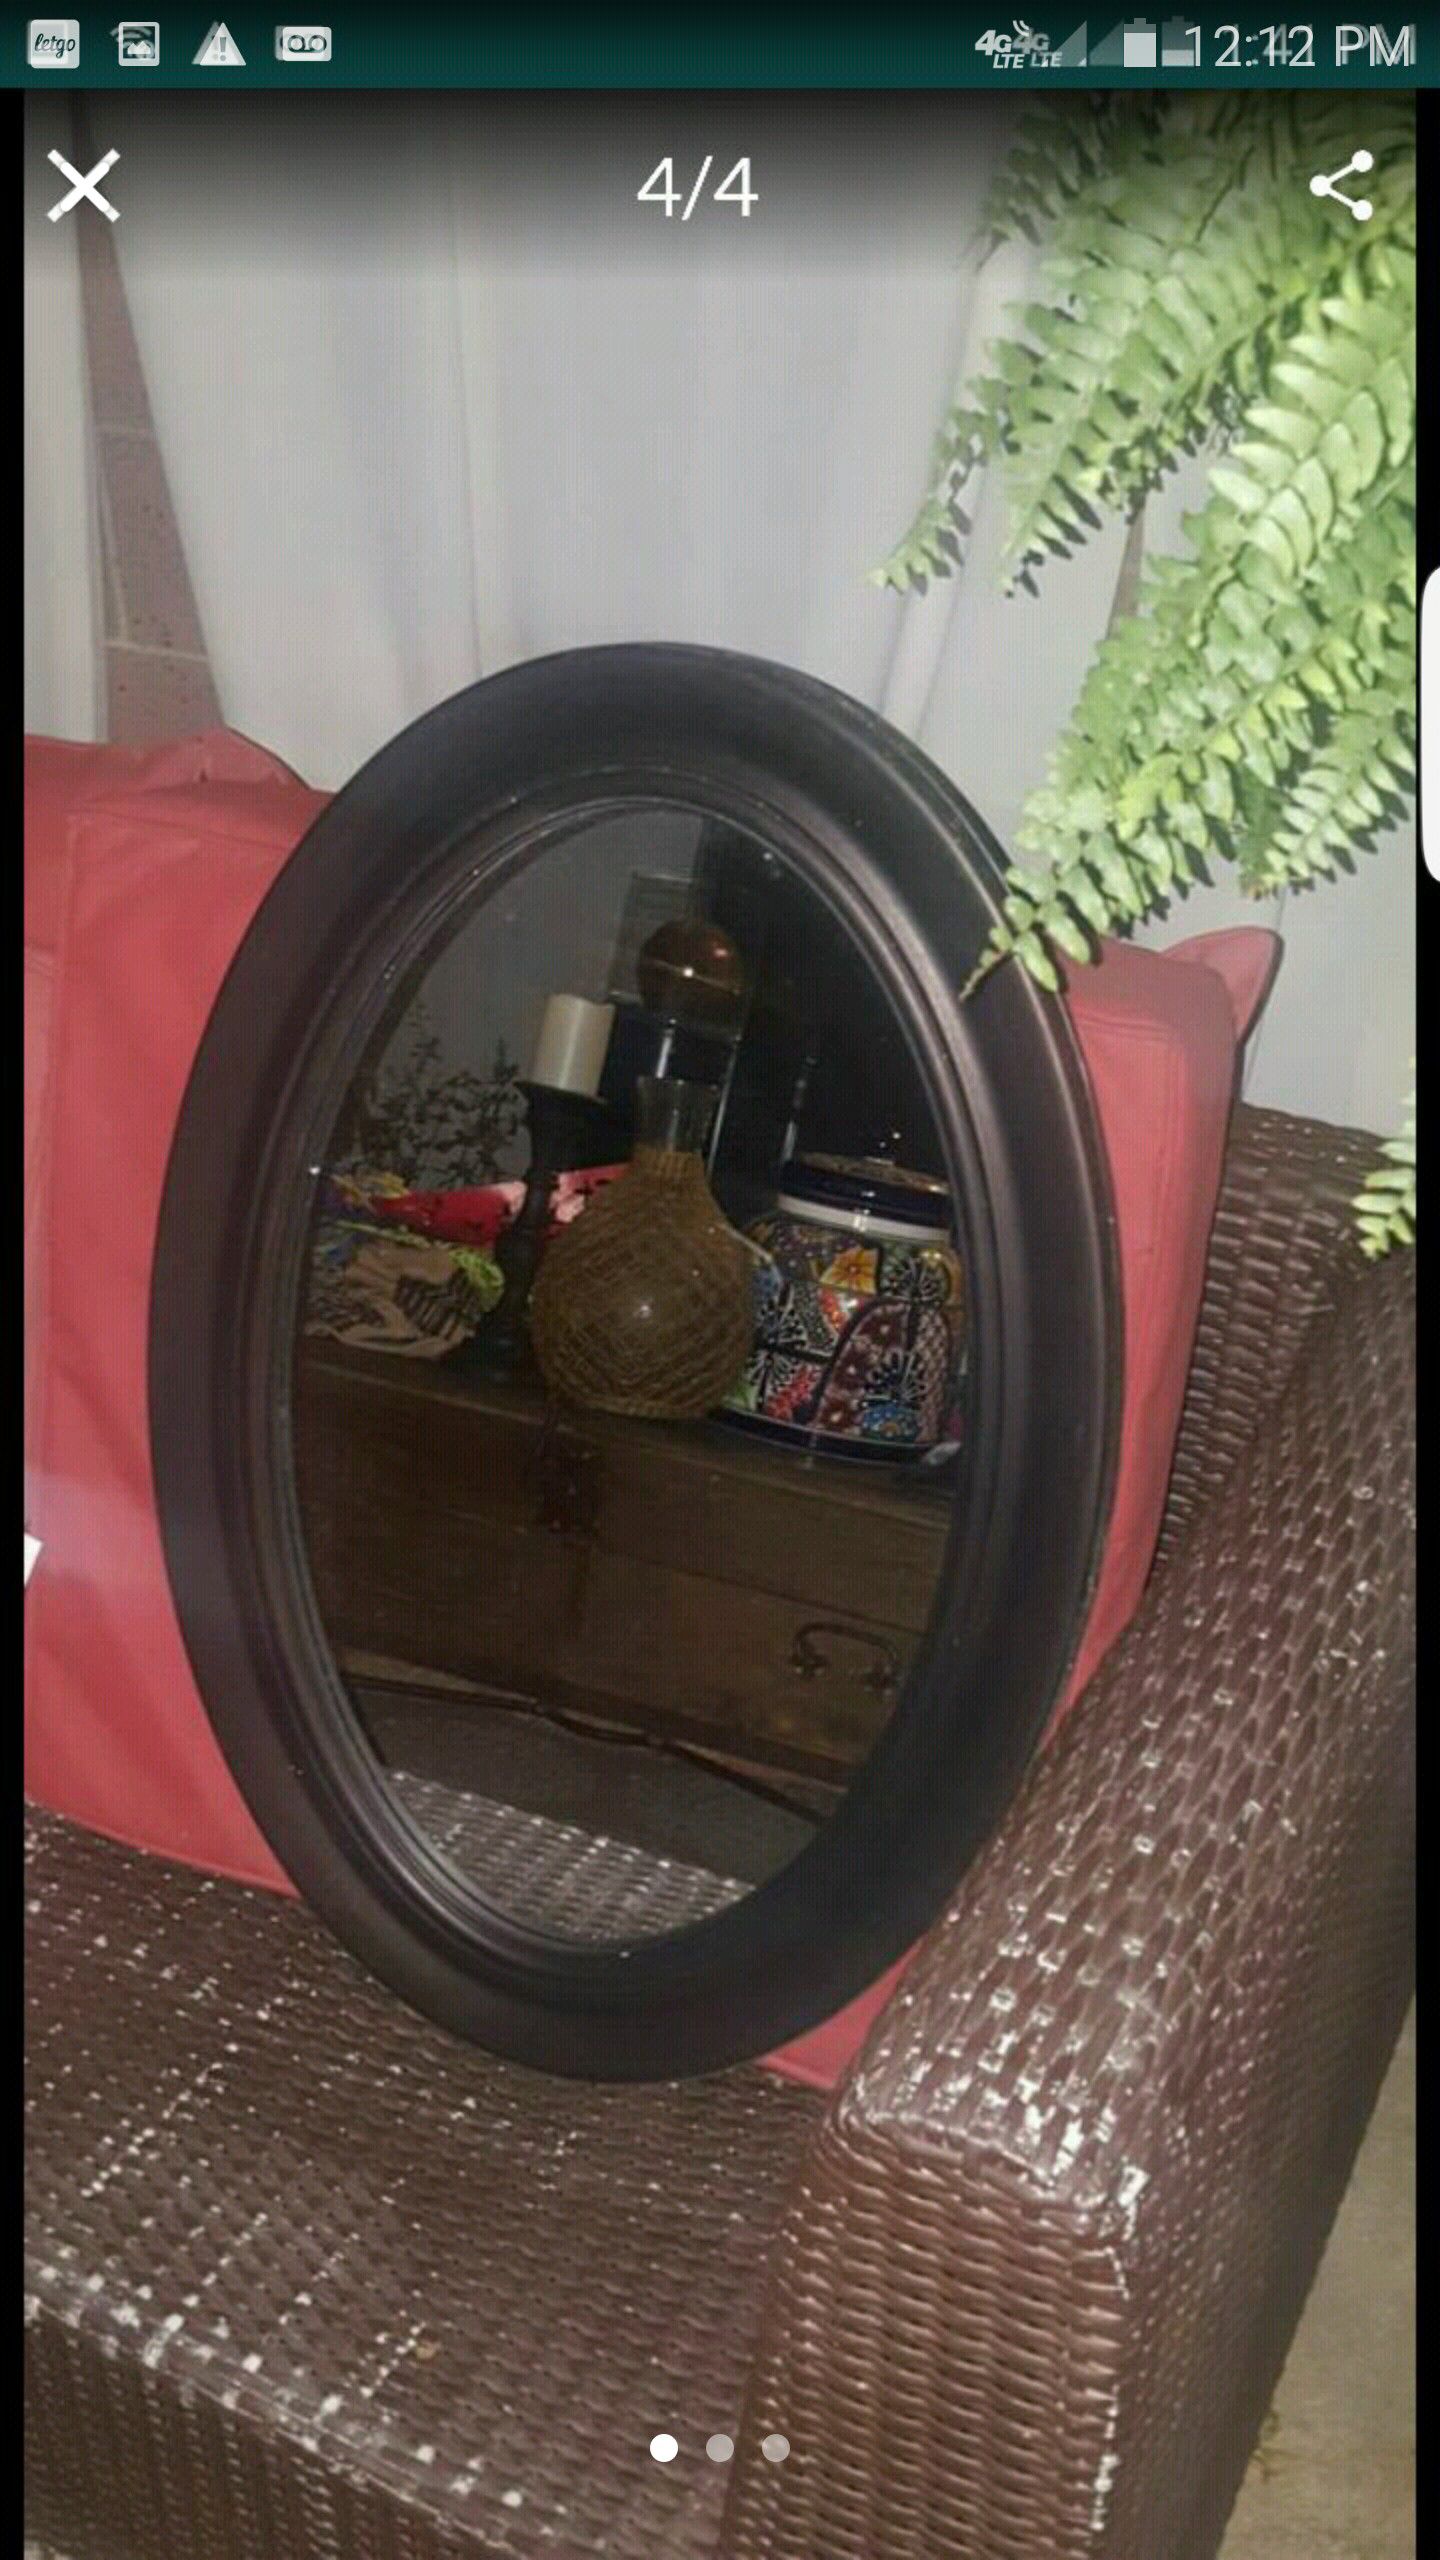 BROWN OVAL MIRROR